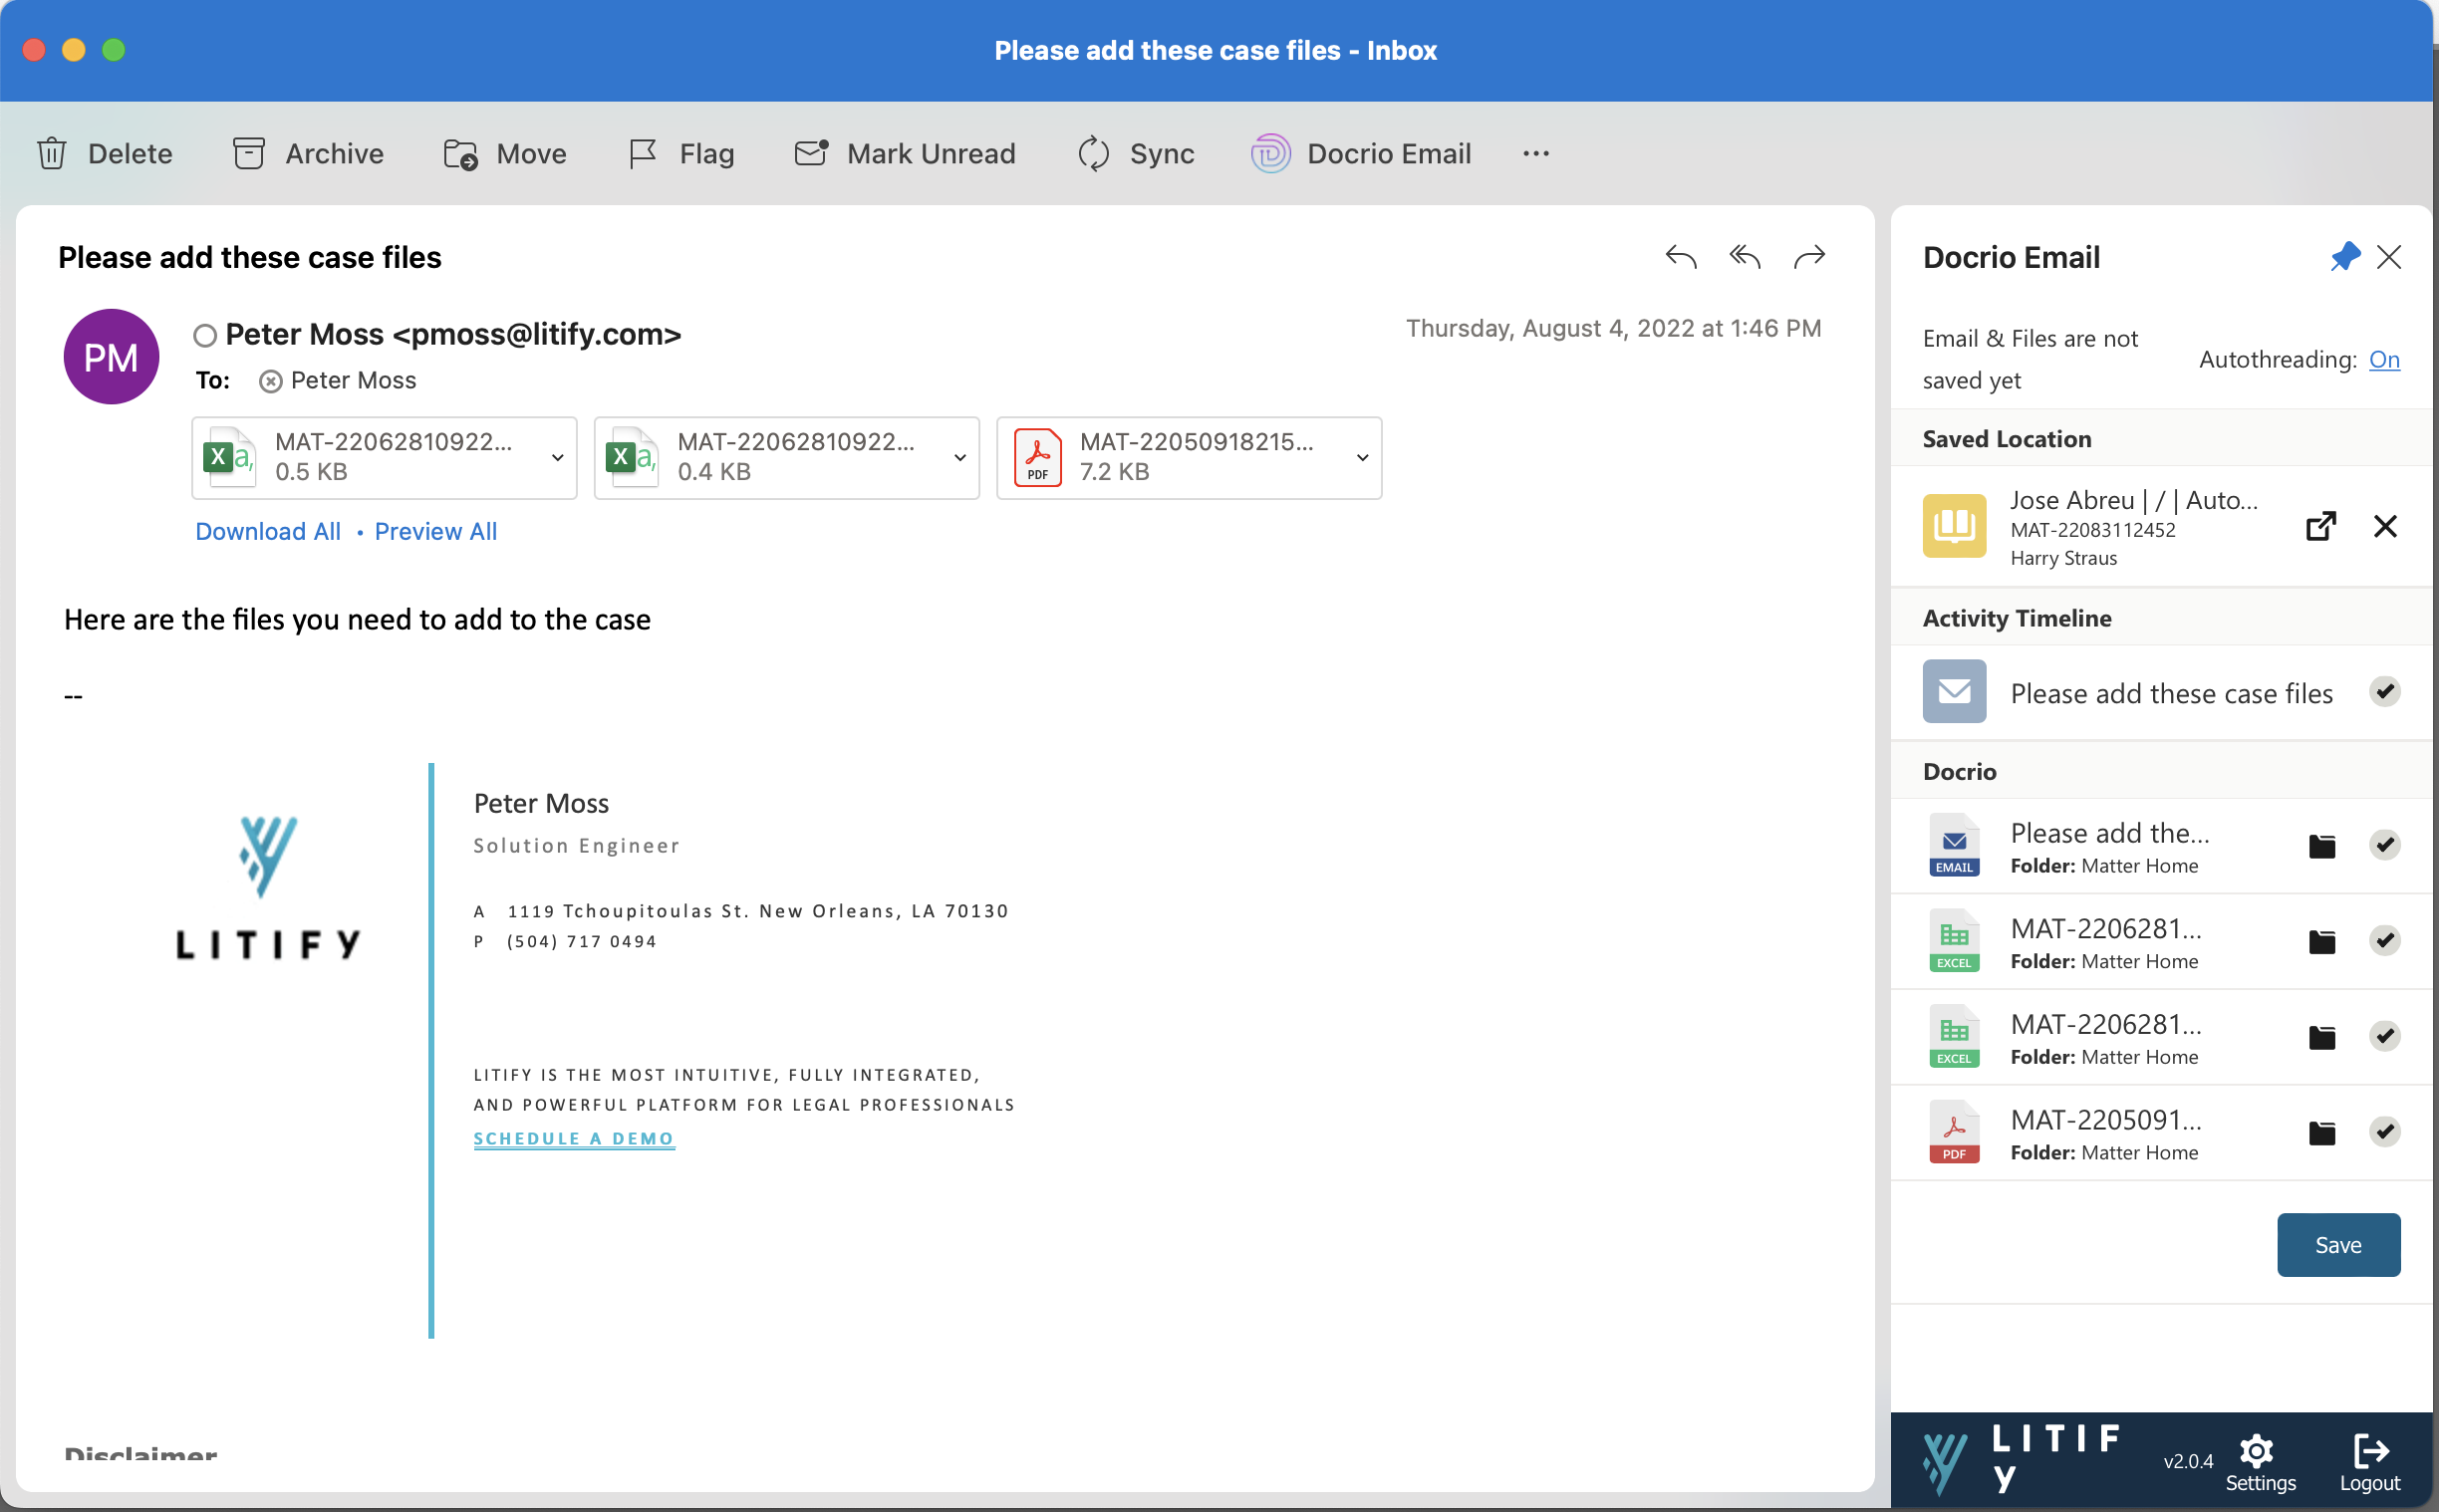 Manage Documents via Email: Save files directly from Outlook to the matter plan with our Docrio Email feature.